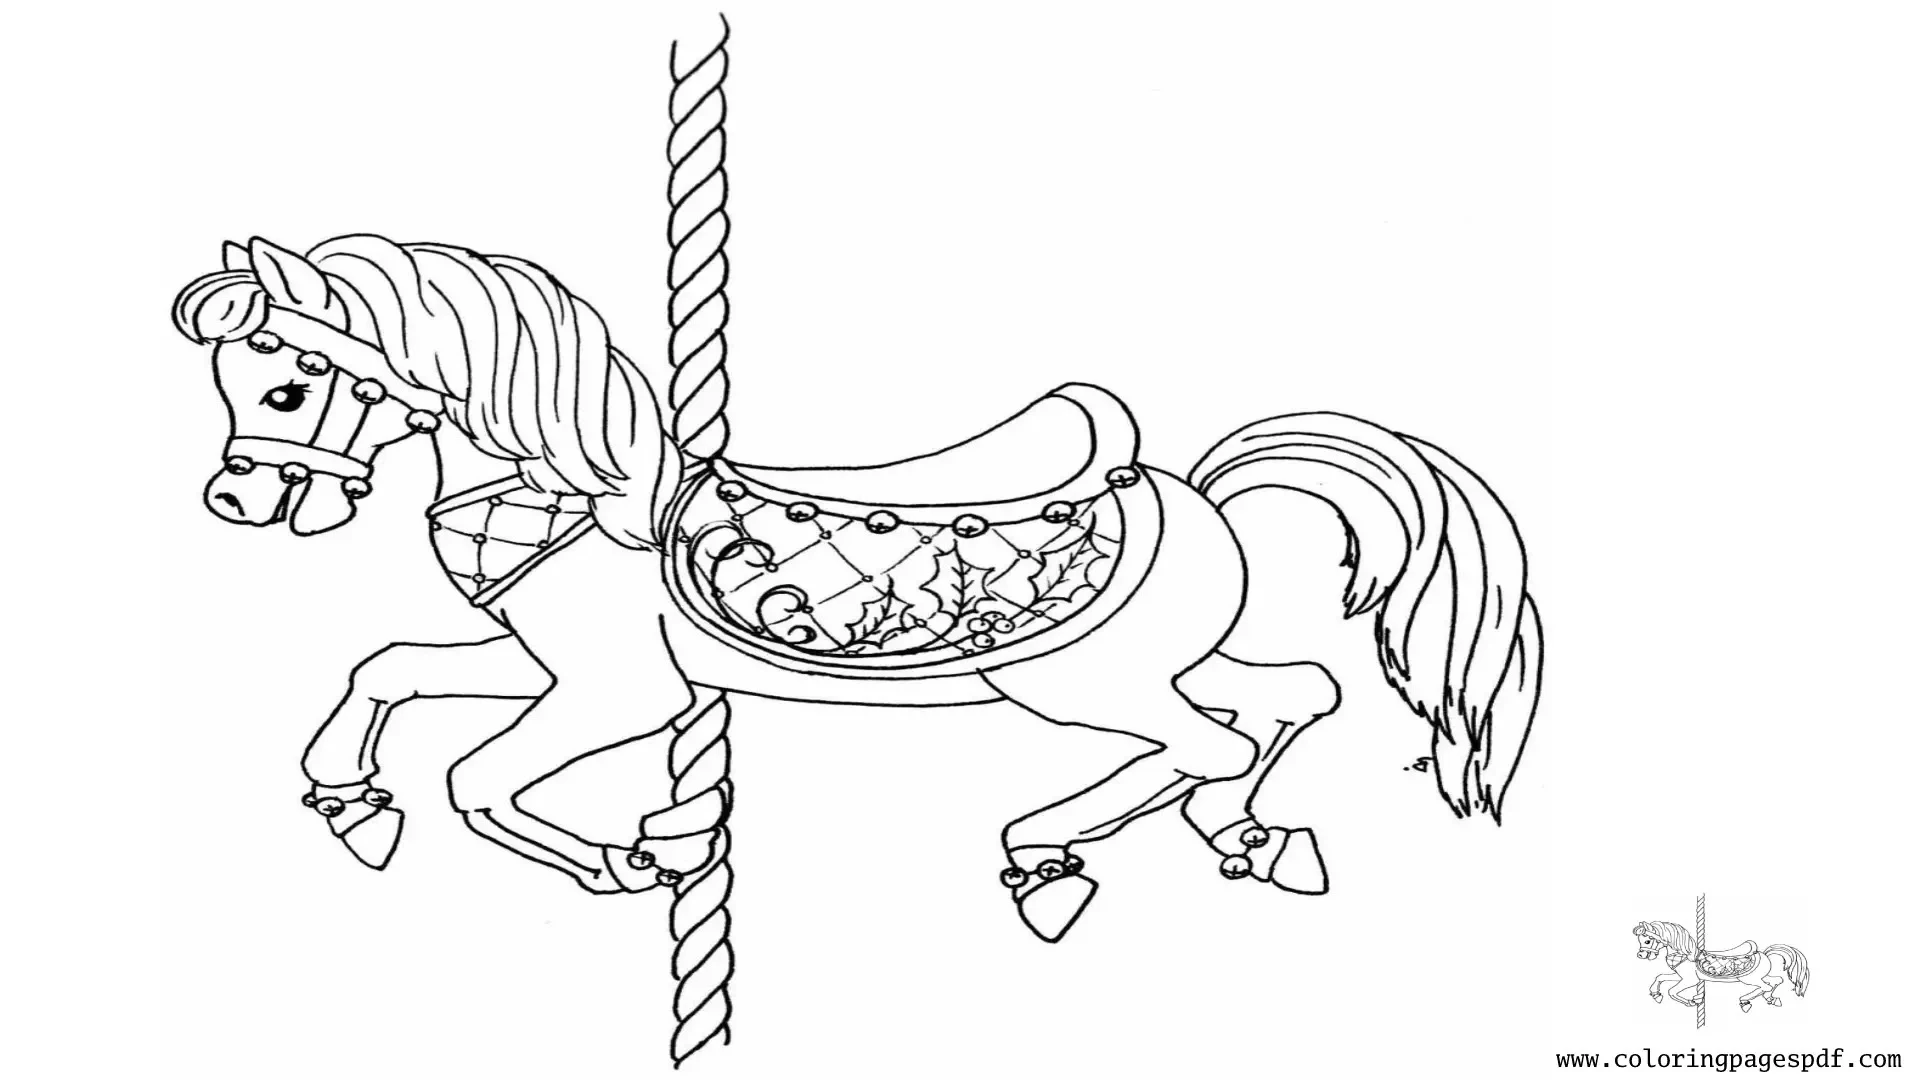 Coloring Page Of A Horse Carousel